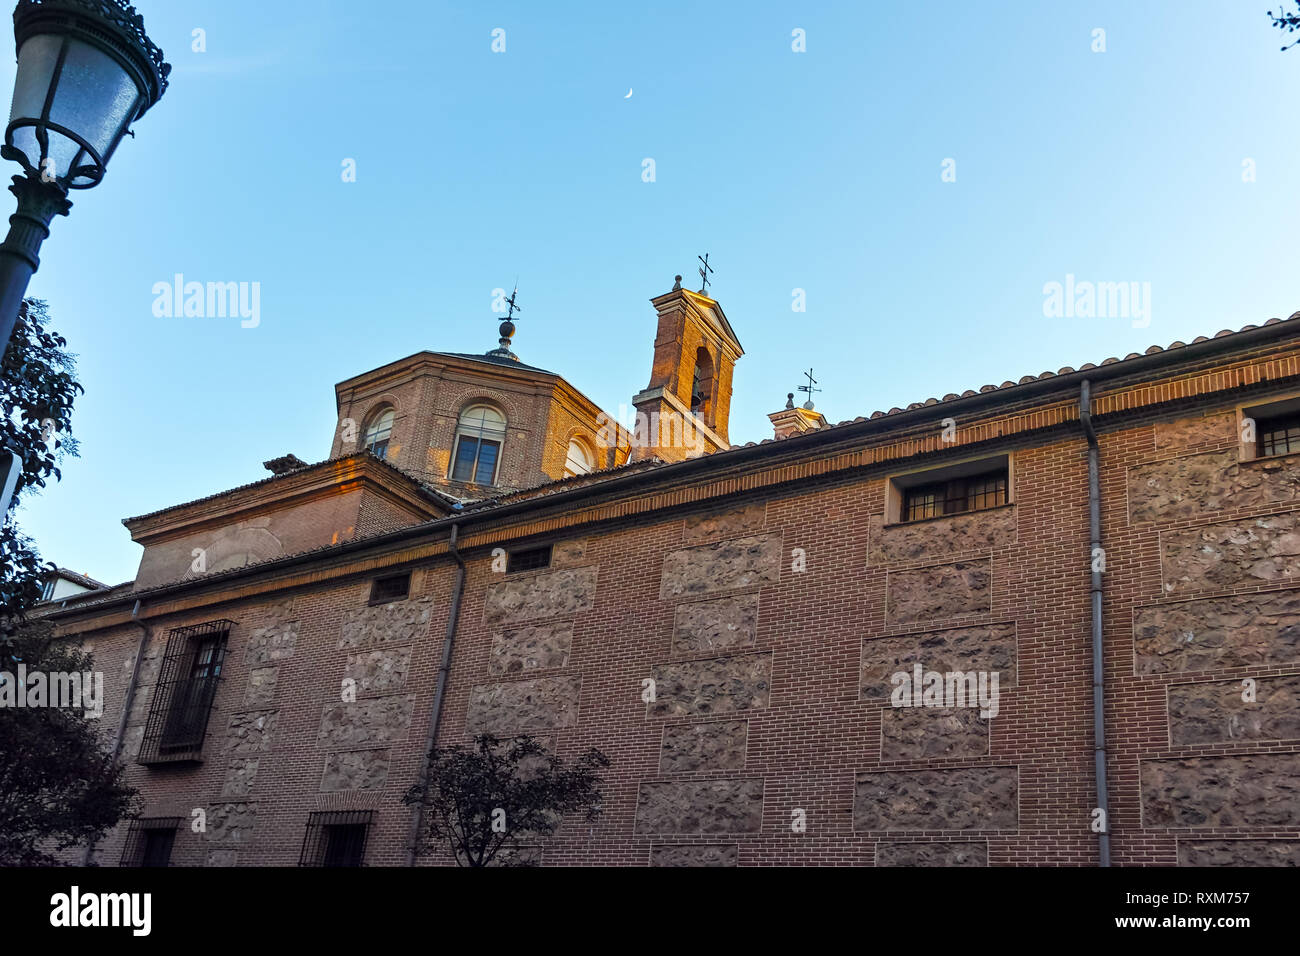 MADRID, SPAIN - JANUARY 22, 2018:  Amazing Sunset view of Royal Monastery of the Incarnation in City of Madrid, Spain Stock Photo